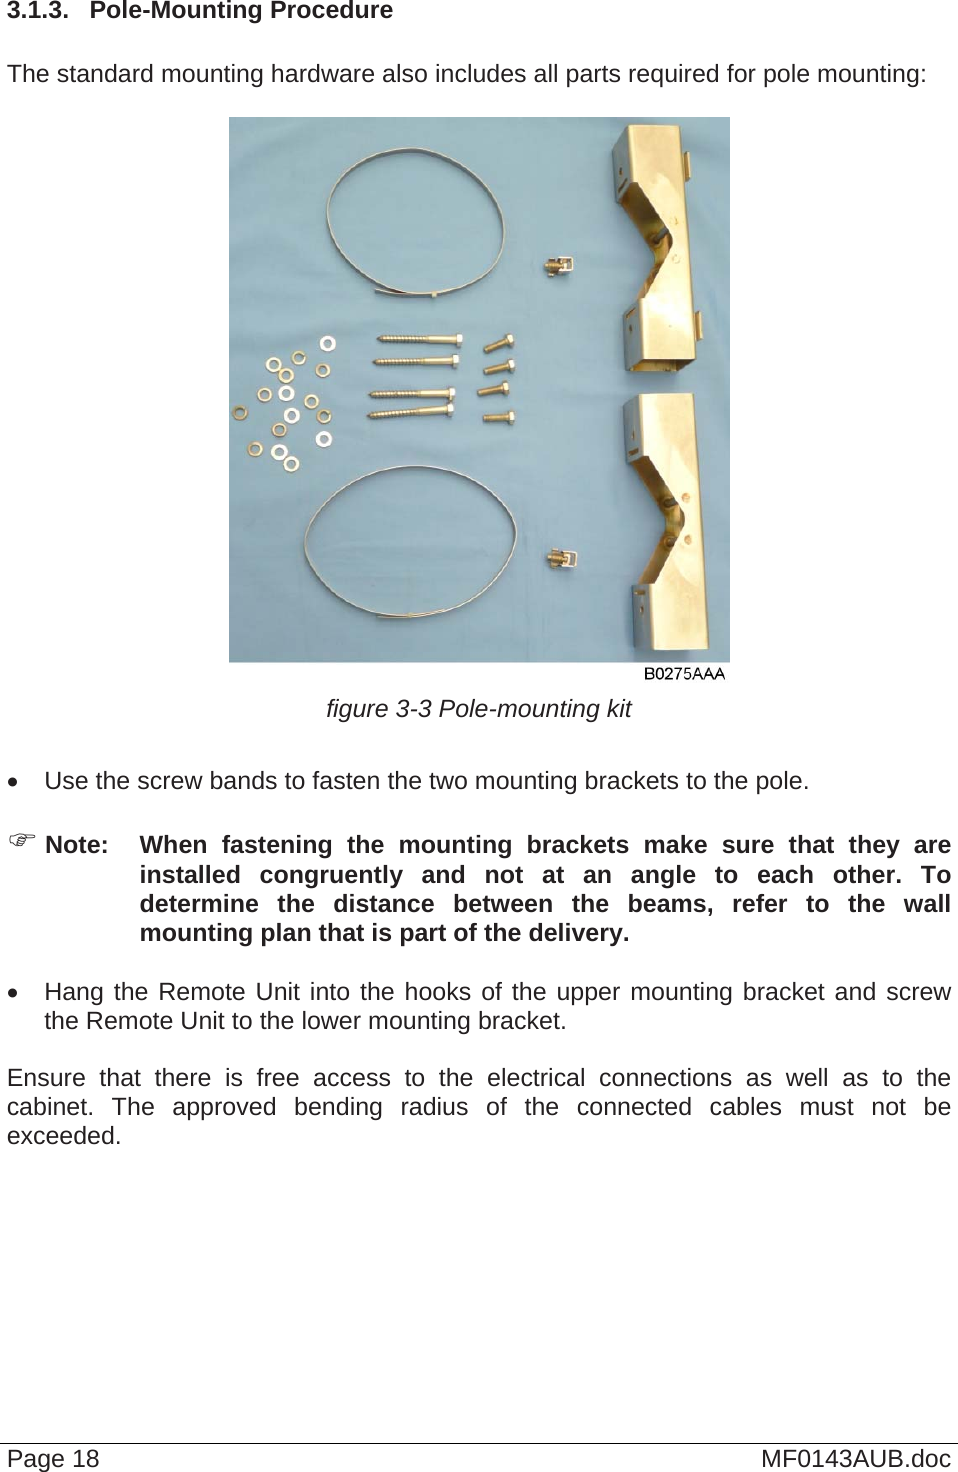  3.1.3.  Pole-Mounting Procedure  The standard mounting hardware also includes all parts required for pole mounting:   figure 3-3 Pole-mounting kit    Use the screw bands to fasten the two mounting brackets to the pole.   Note:  When fastening the mounting brackets make sure that they are installed congruently and not at an angle to each other. To determine the distance between the beams, refer to the wall mounting plan that is part of the delivery.    Hang the Remote Unit into the hooks of the upper mounting bracket and screw the Remote Unit to the lower mounting bracket.  Ensure that there is free access to the electrical connections as well as to the cabinet. The approved bending radius of the connected cables must not be exceeded.   Page 18  MF0143AUB.doc 